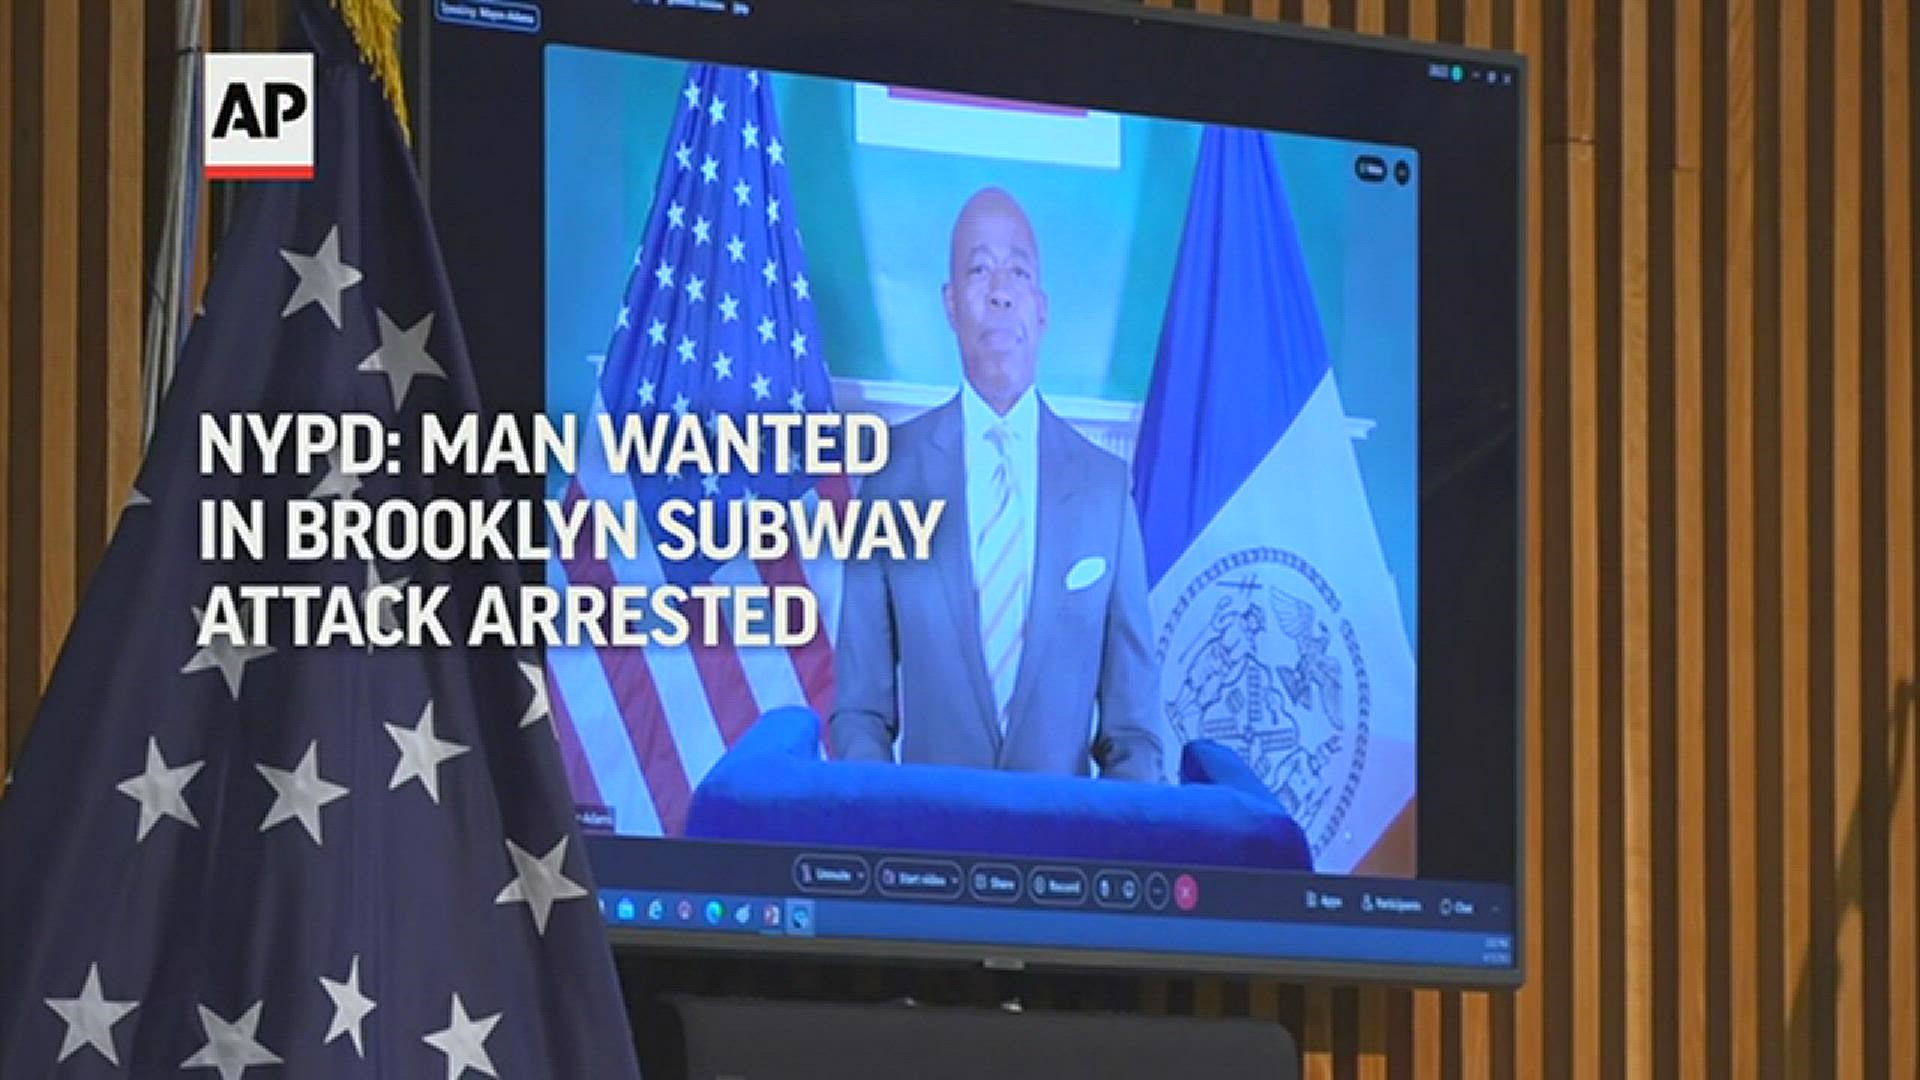 Authorities have arrested a man wanted in an attack on a subway train in Brooklyn that left 10 people wounded by gunfire.